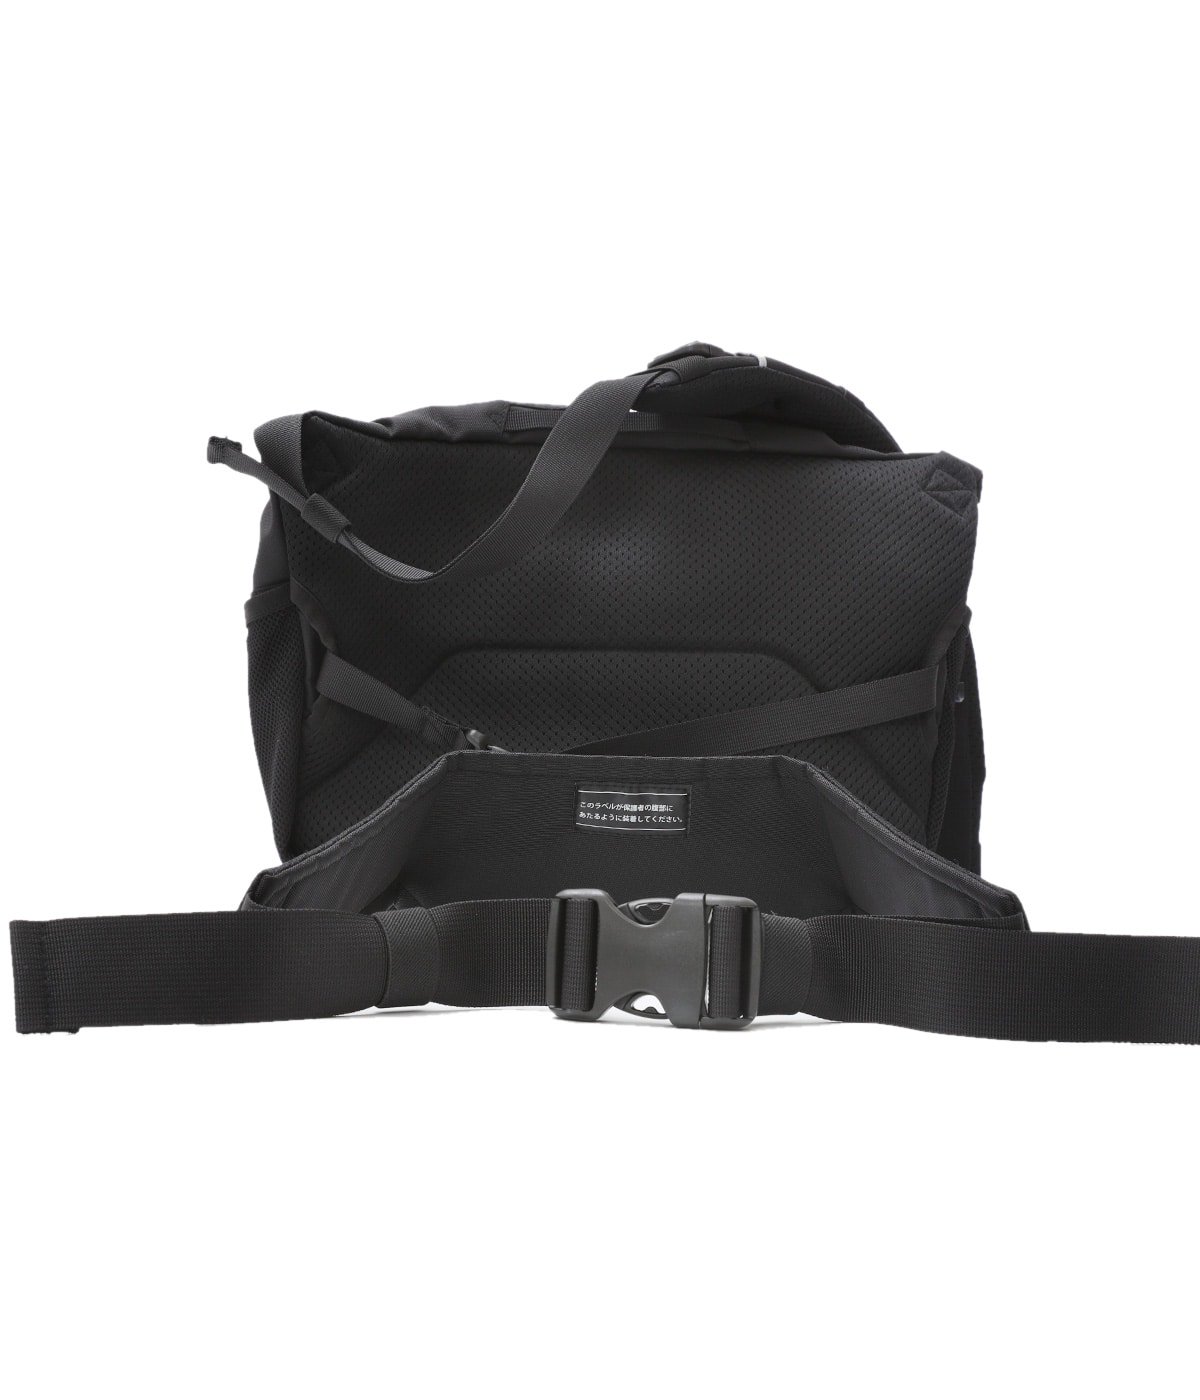 Baby Sling Bag | THE NORTH FACE(ザ ノースフェイス) / バッグ ...